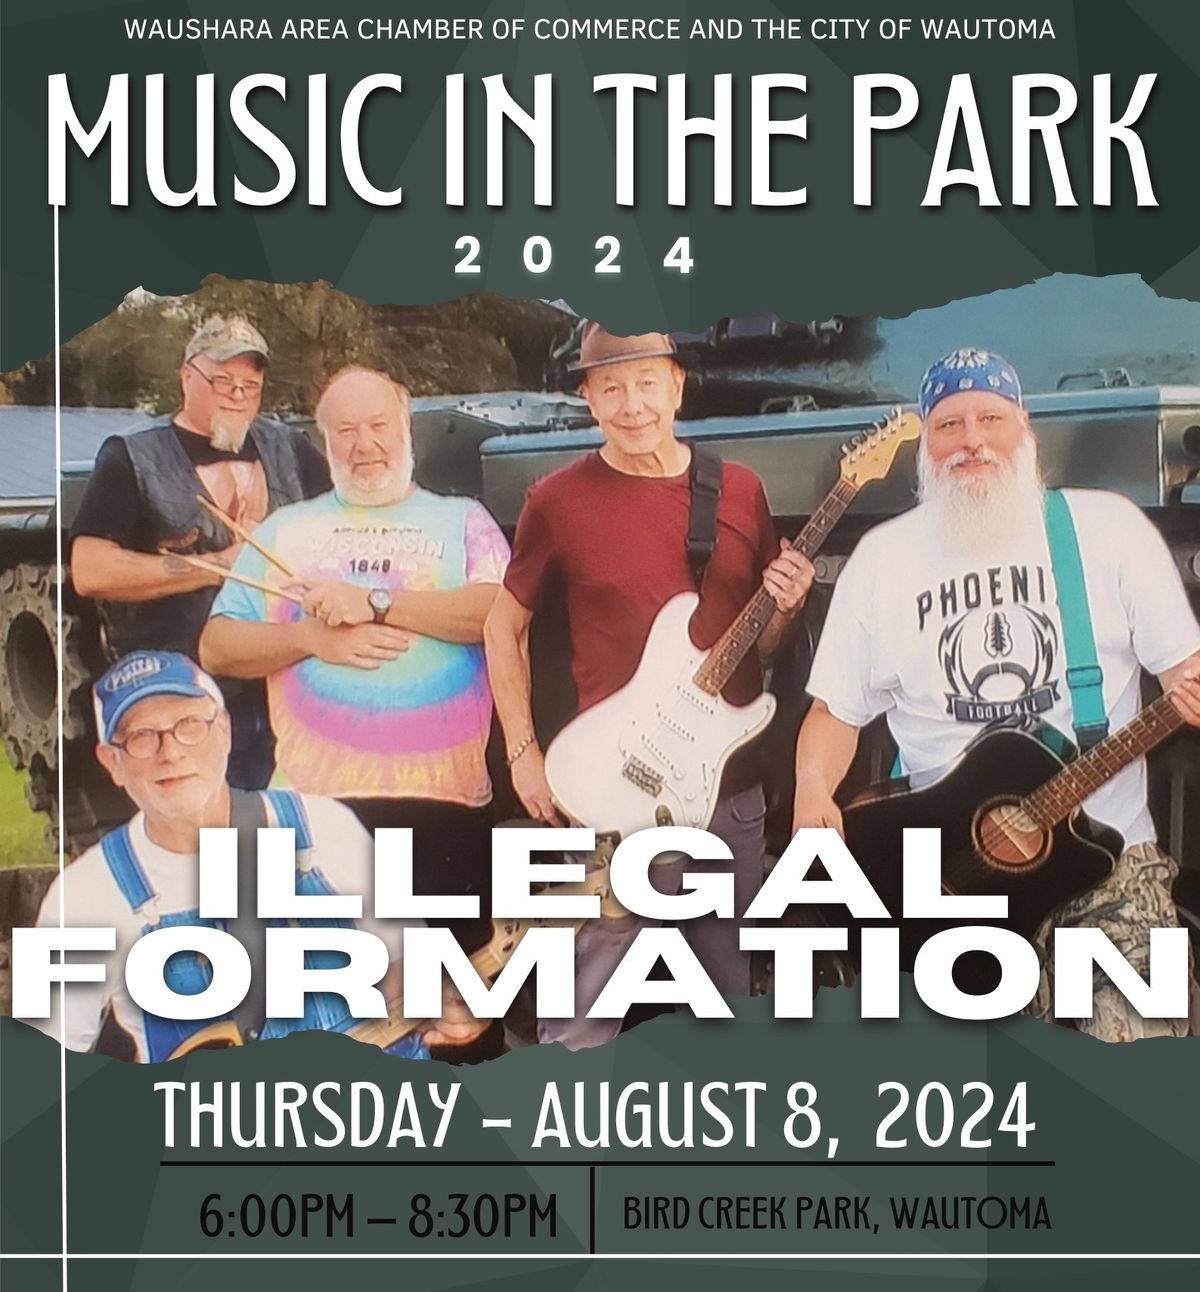 Music in the Park - Illegal Formation 